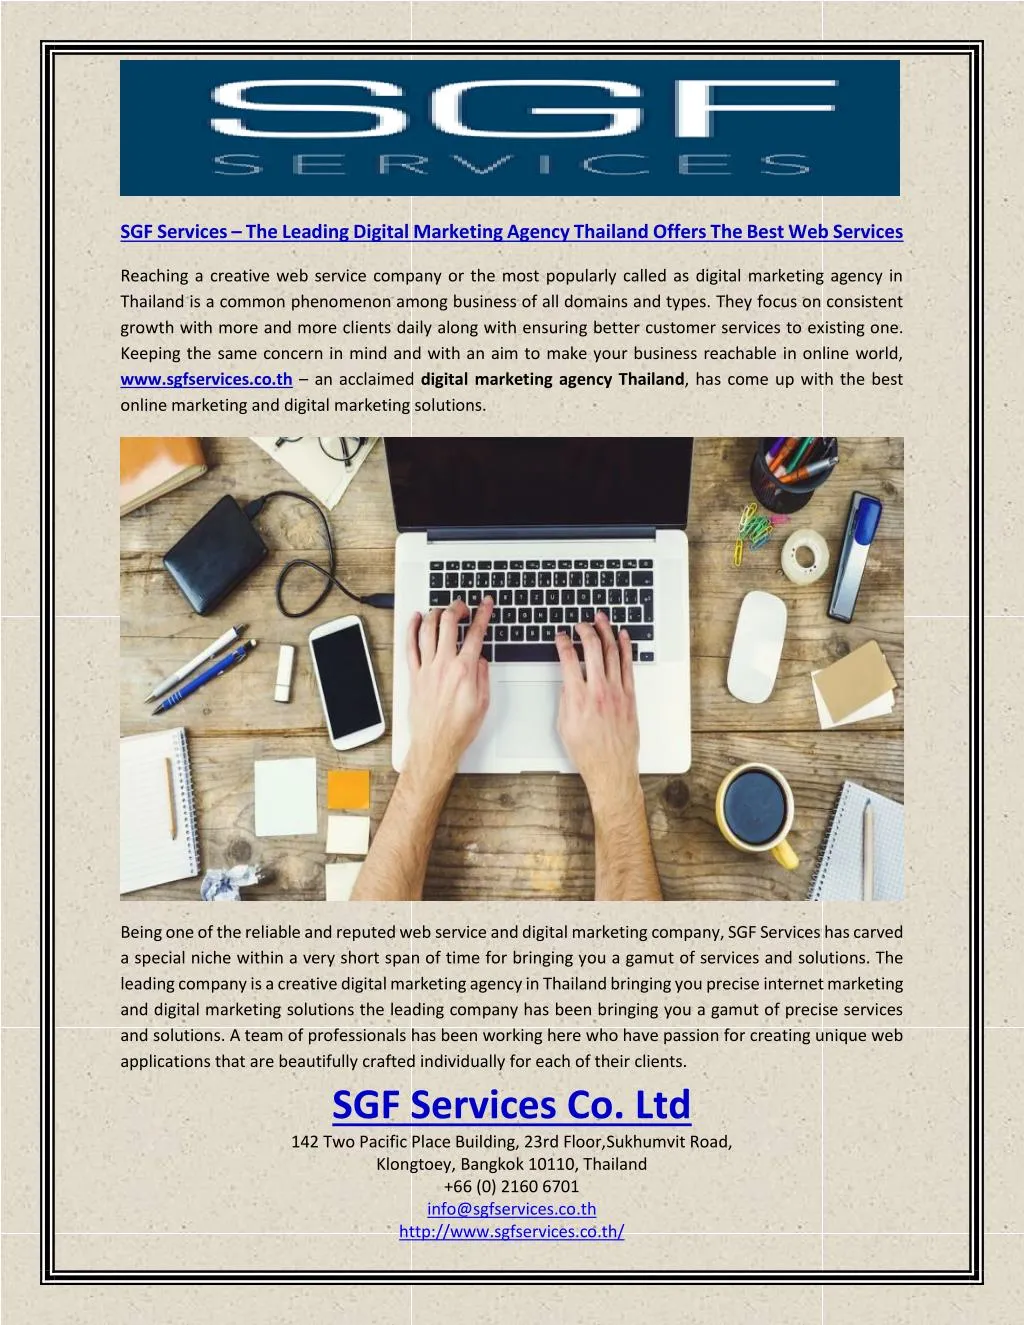 sgf services the leading digital marketing agency